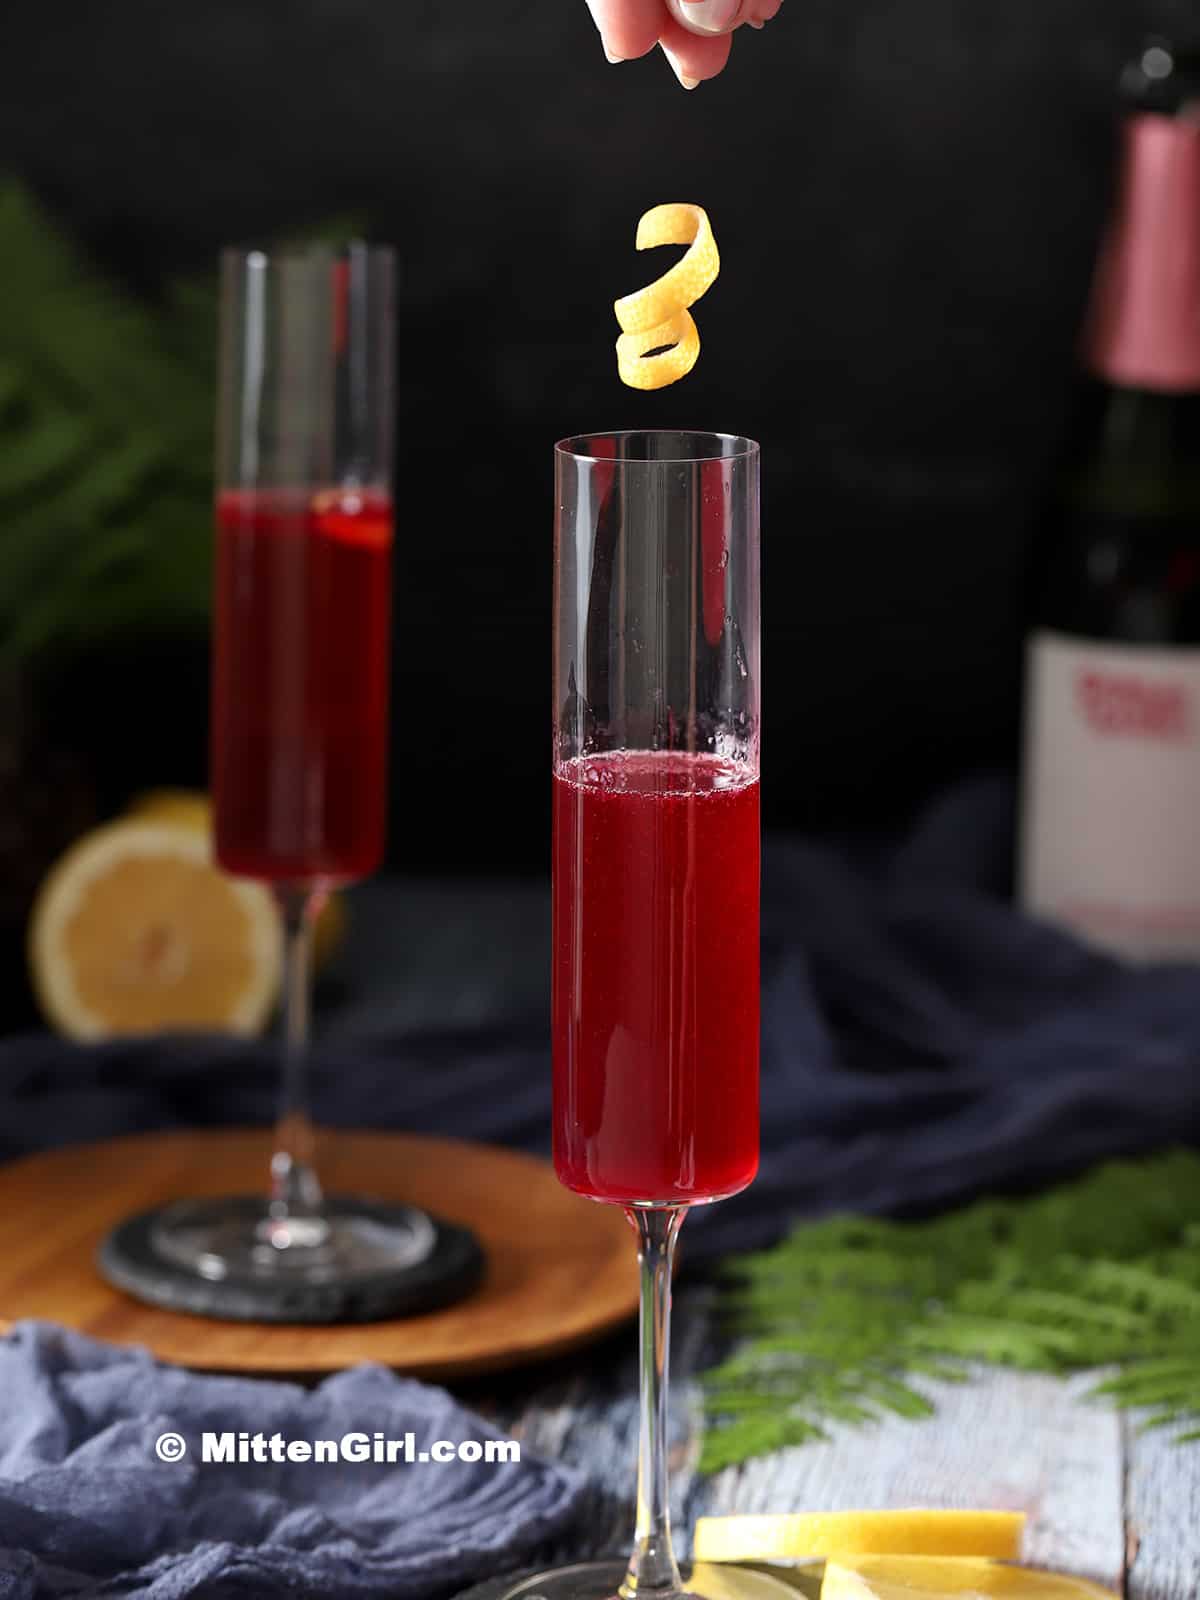 A lemon peel twist being dropped into a glass of blueberry french 75 cocktail.